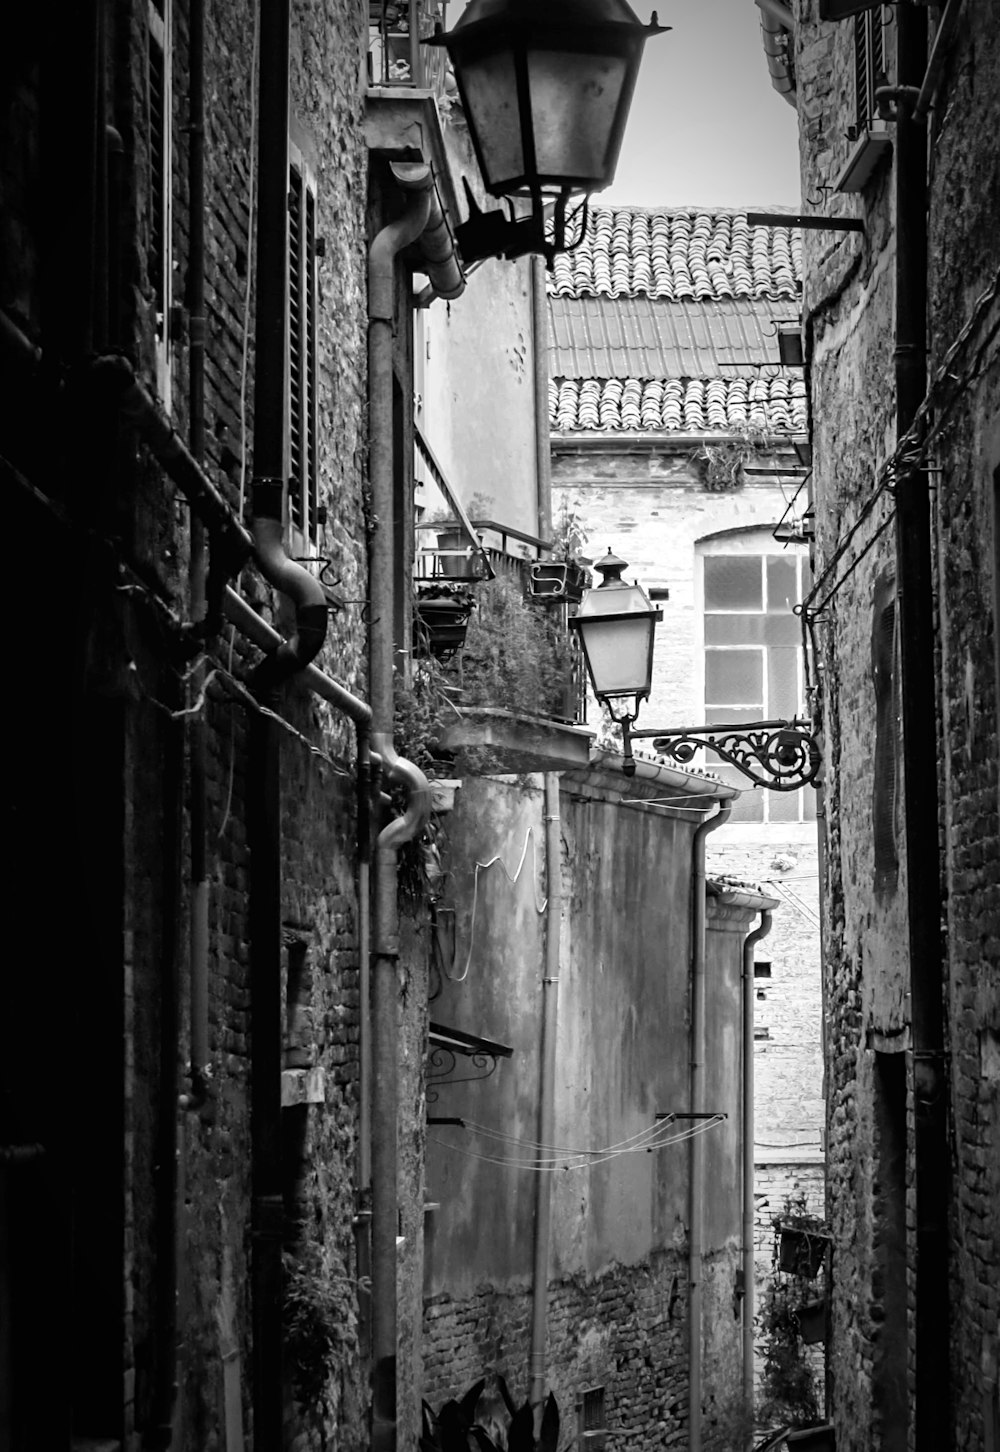 a black and white photo of an alley way